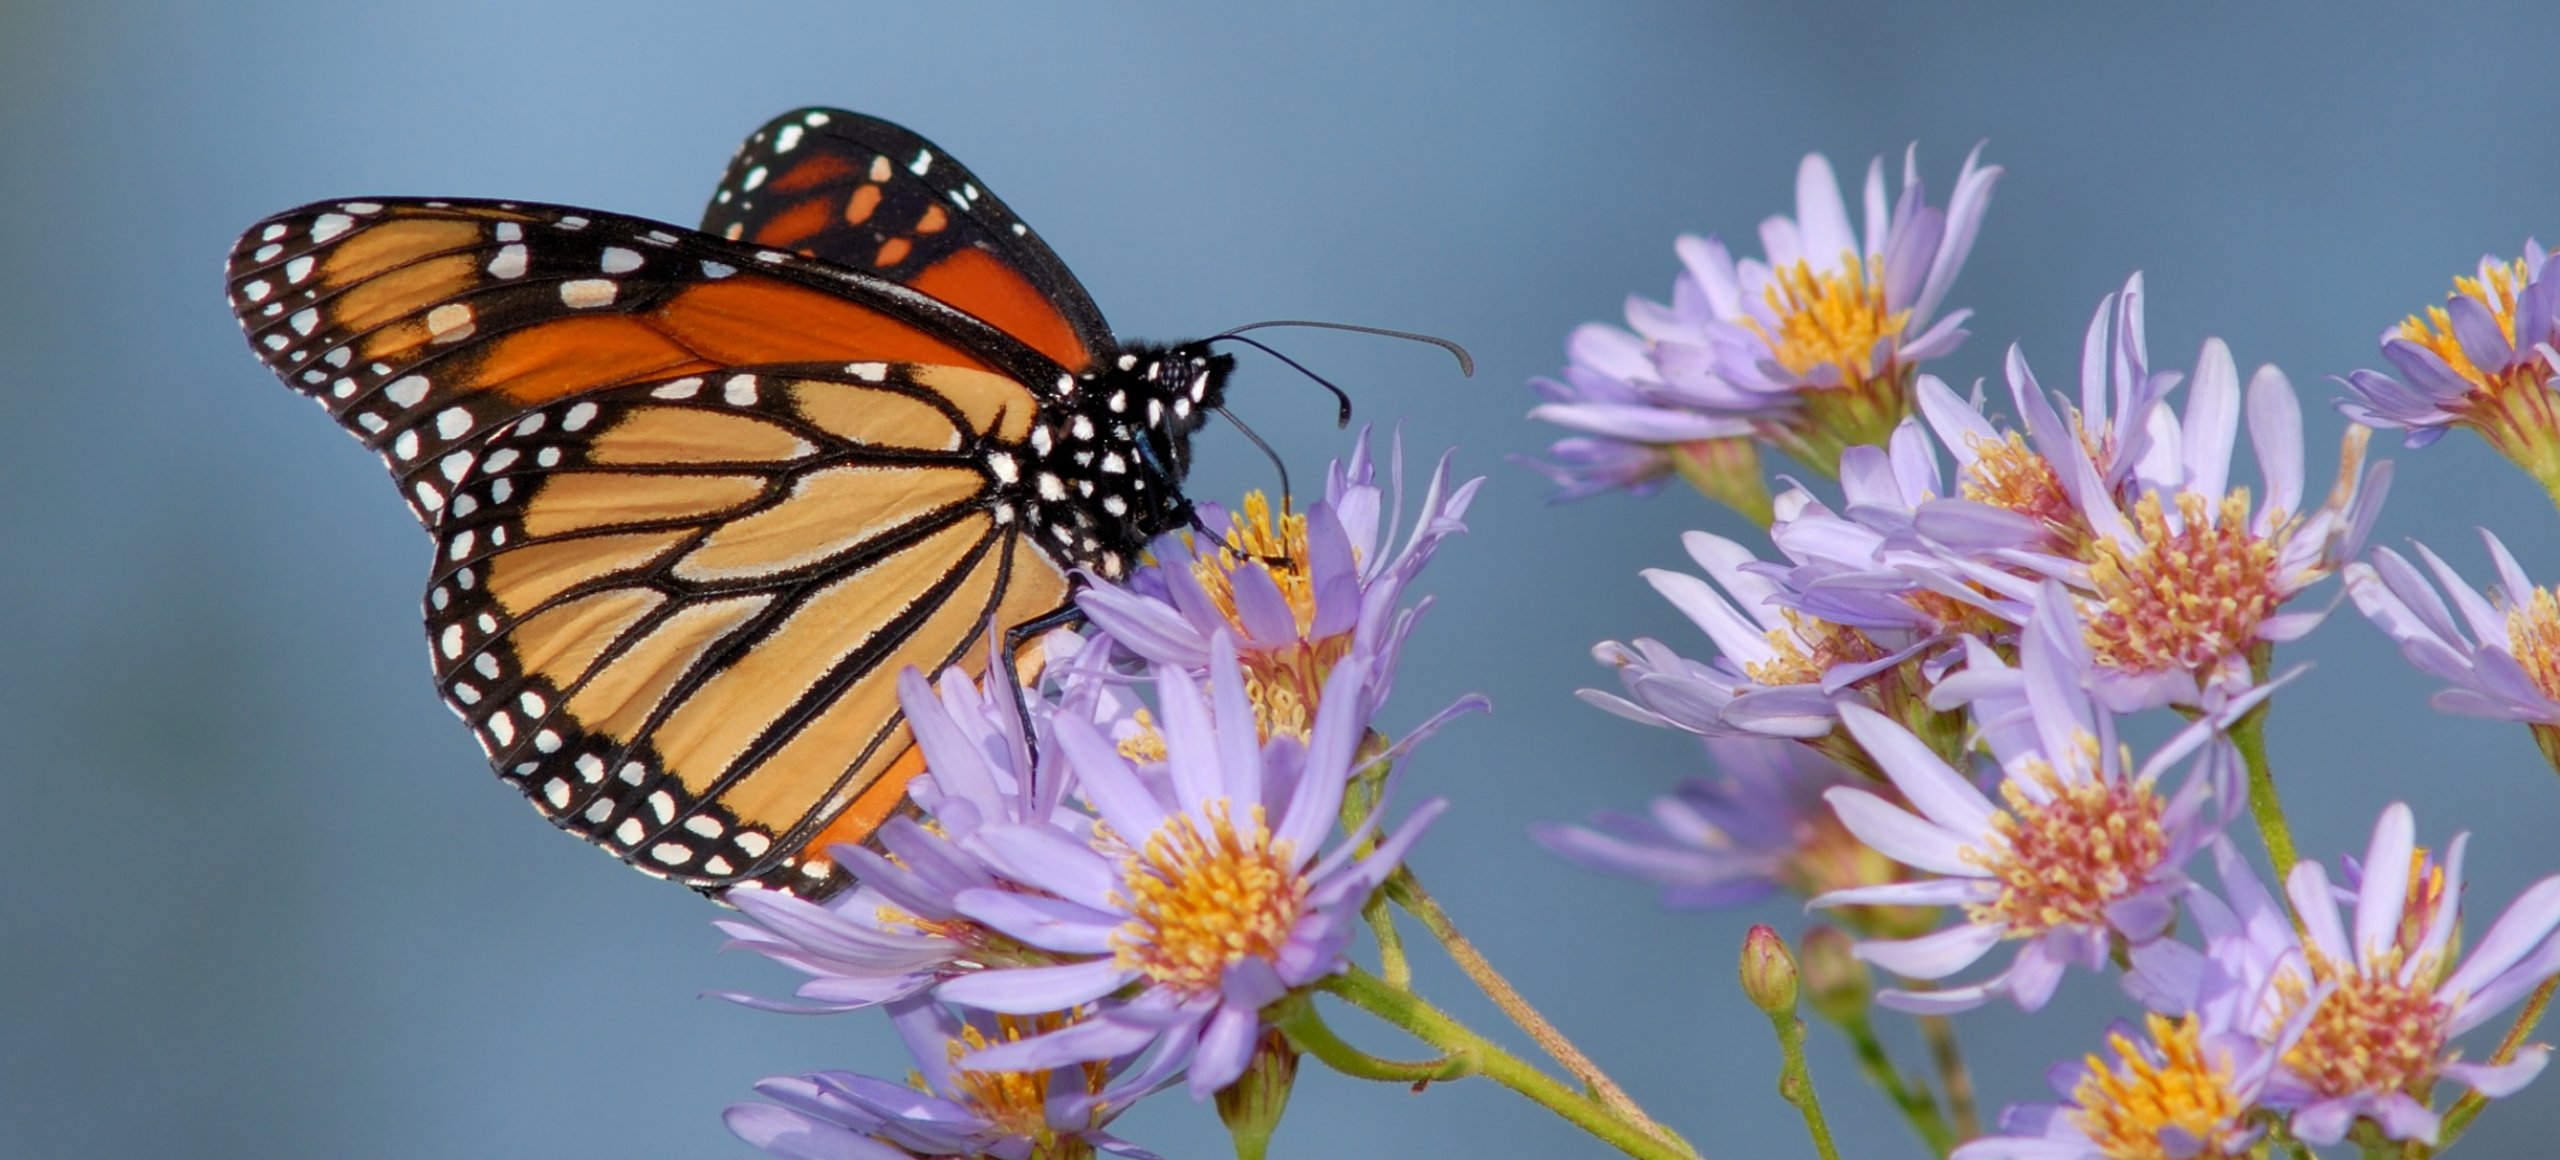 A close up shot of an orange monarch butterfly sitting on small lavender-colored wildflowers with yellow centers.